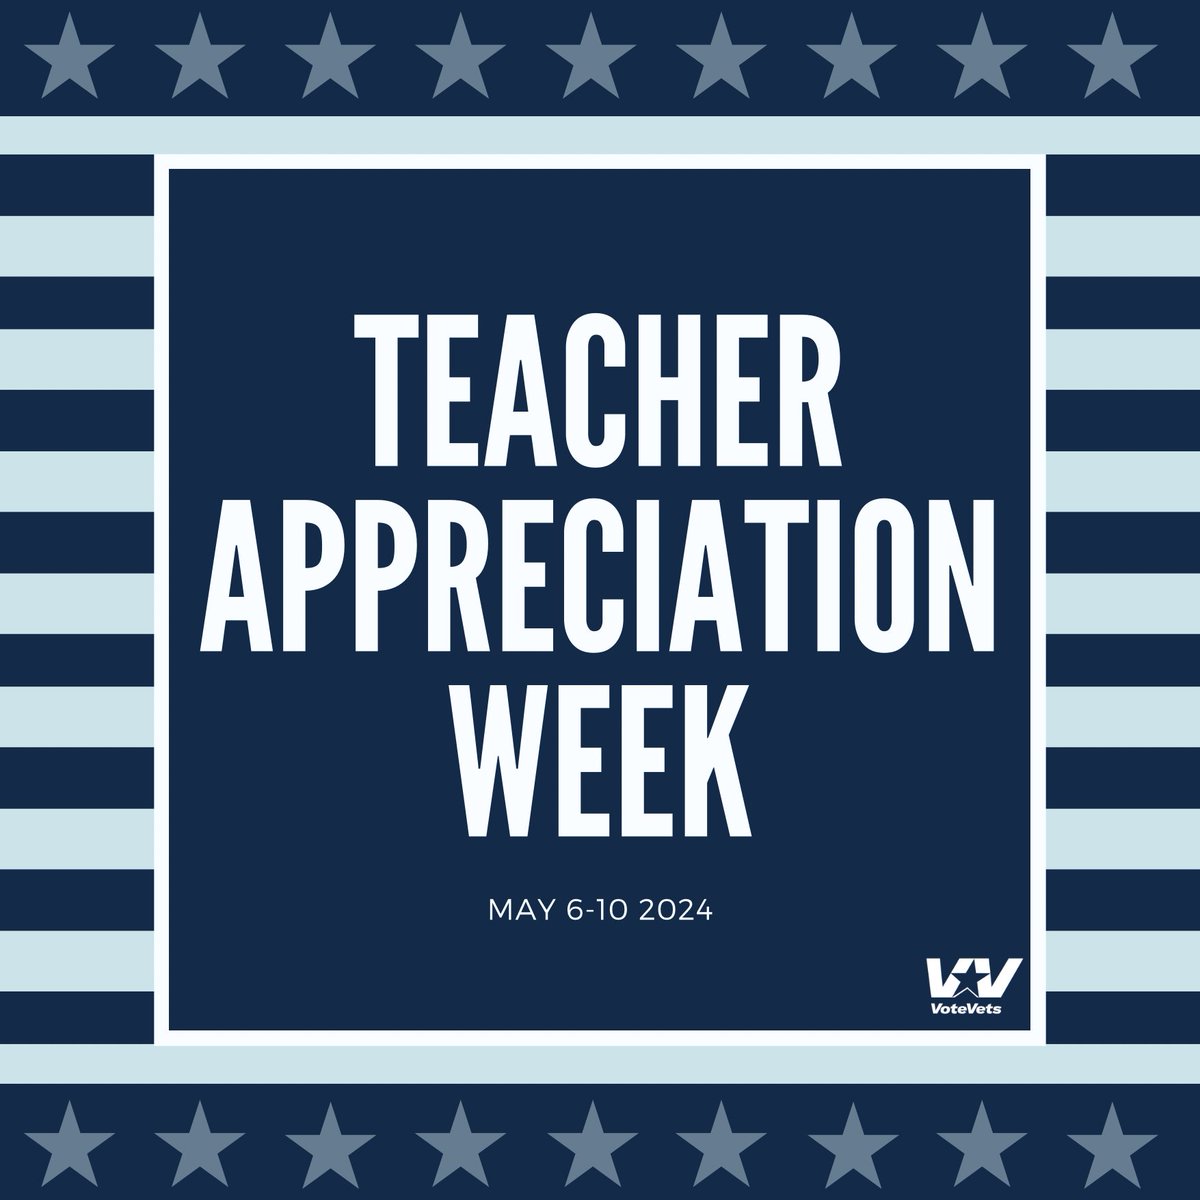 Happy Teacher Appreciation Week! Especially to all those who’ve served, and now serve their communities! 🇺🇸📚